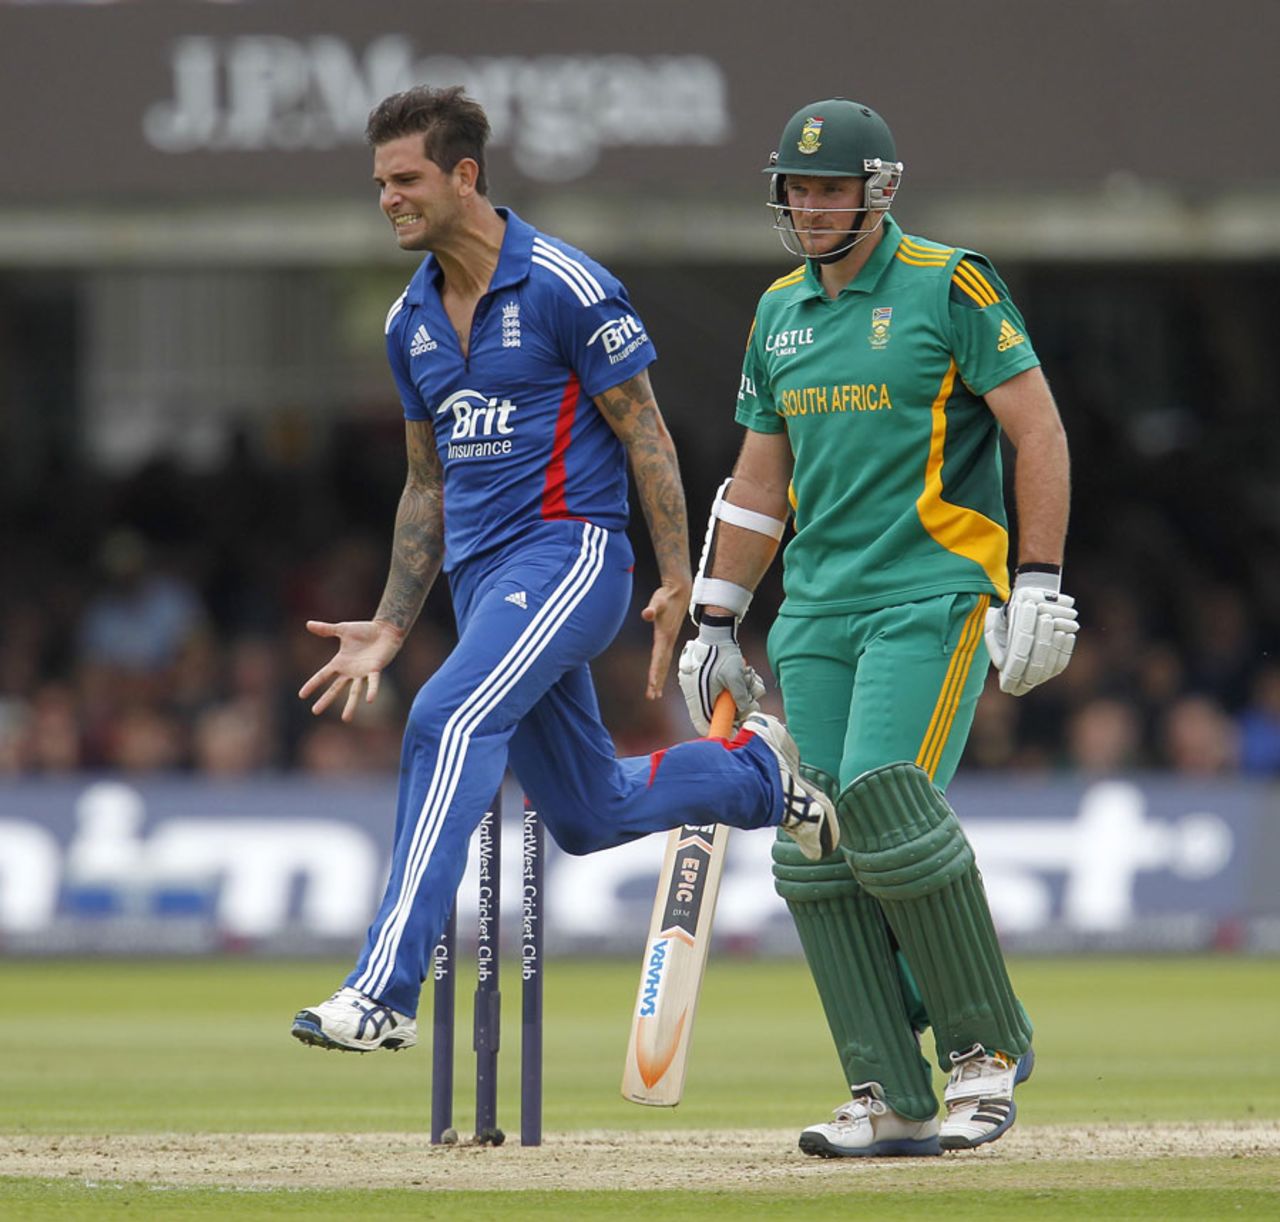 Jade Dernbach made the breakthrough with the wicket of Graeme Smith, England v South Africa, 4th ODI, Lord's, September 2, 2012